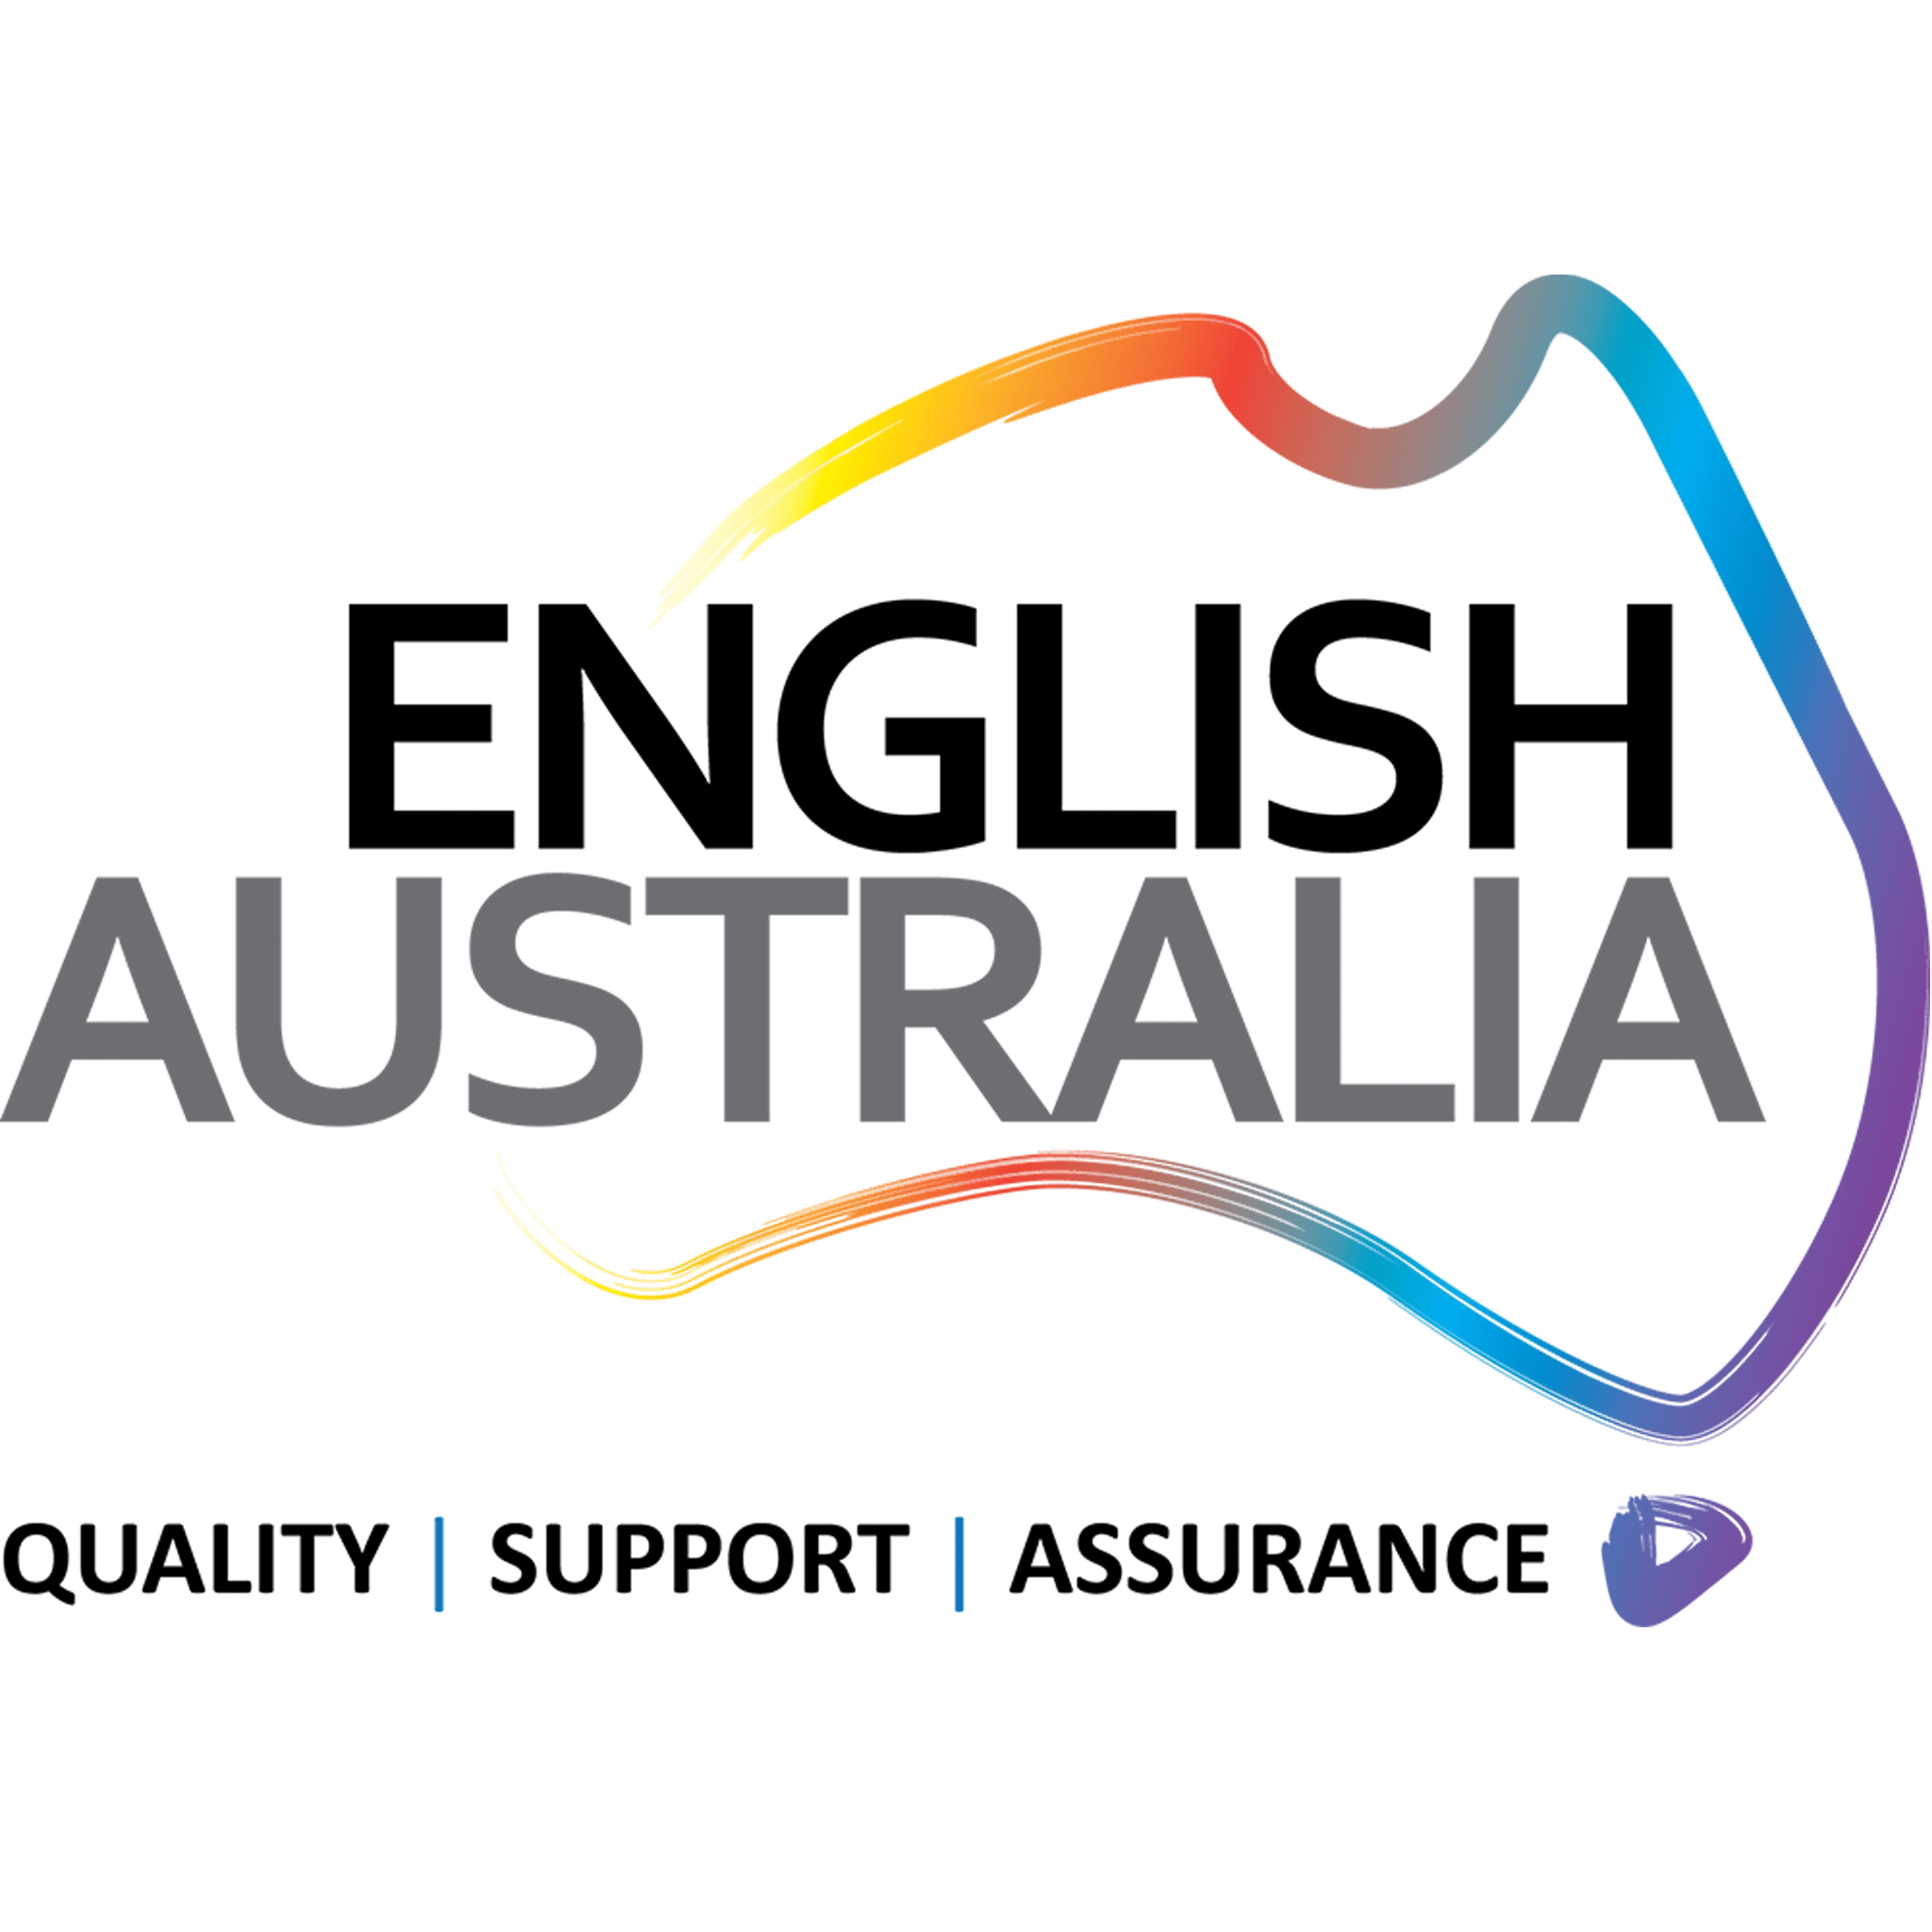 English Australia Logo with the world Quality, Support and Assurance